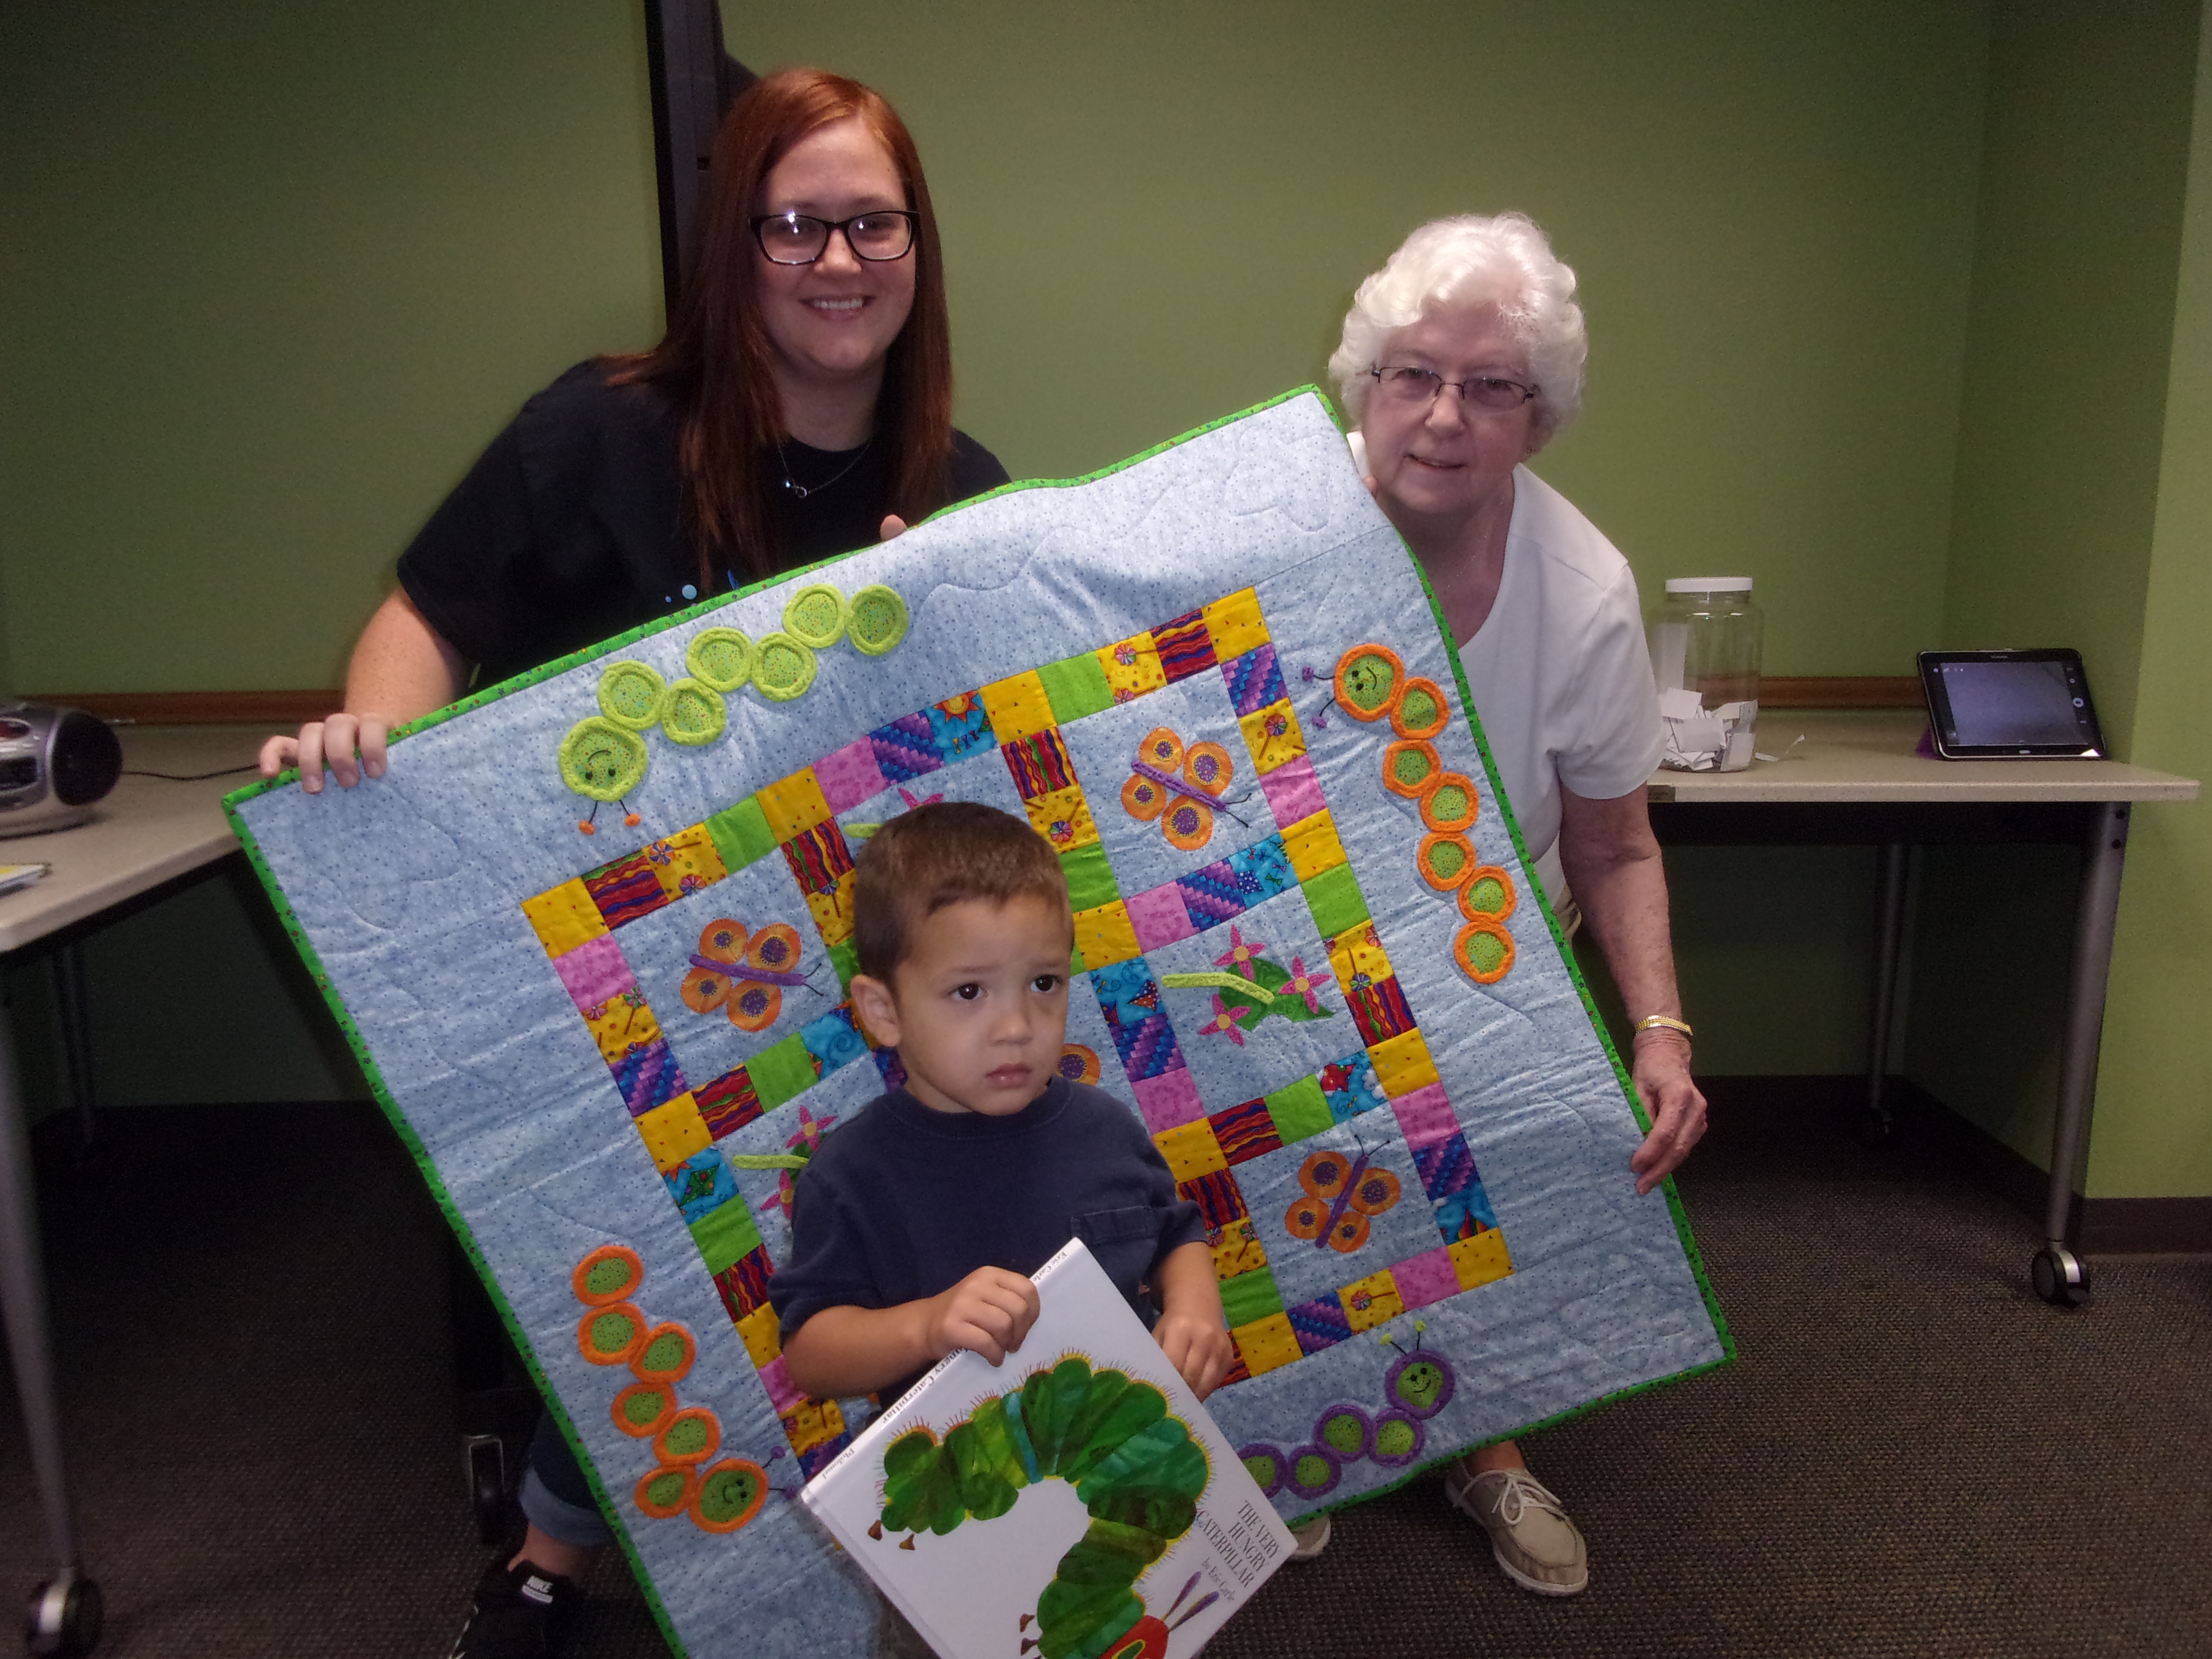 Warsaw Story Time Winner of quilt and book